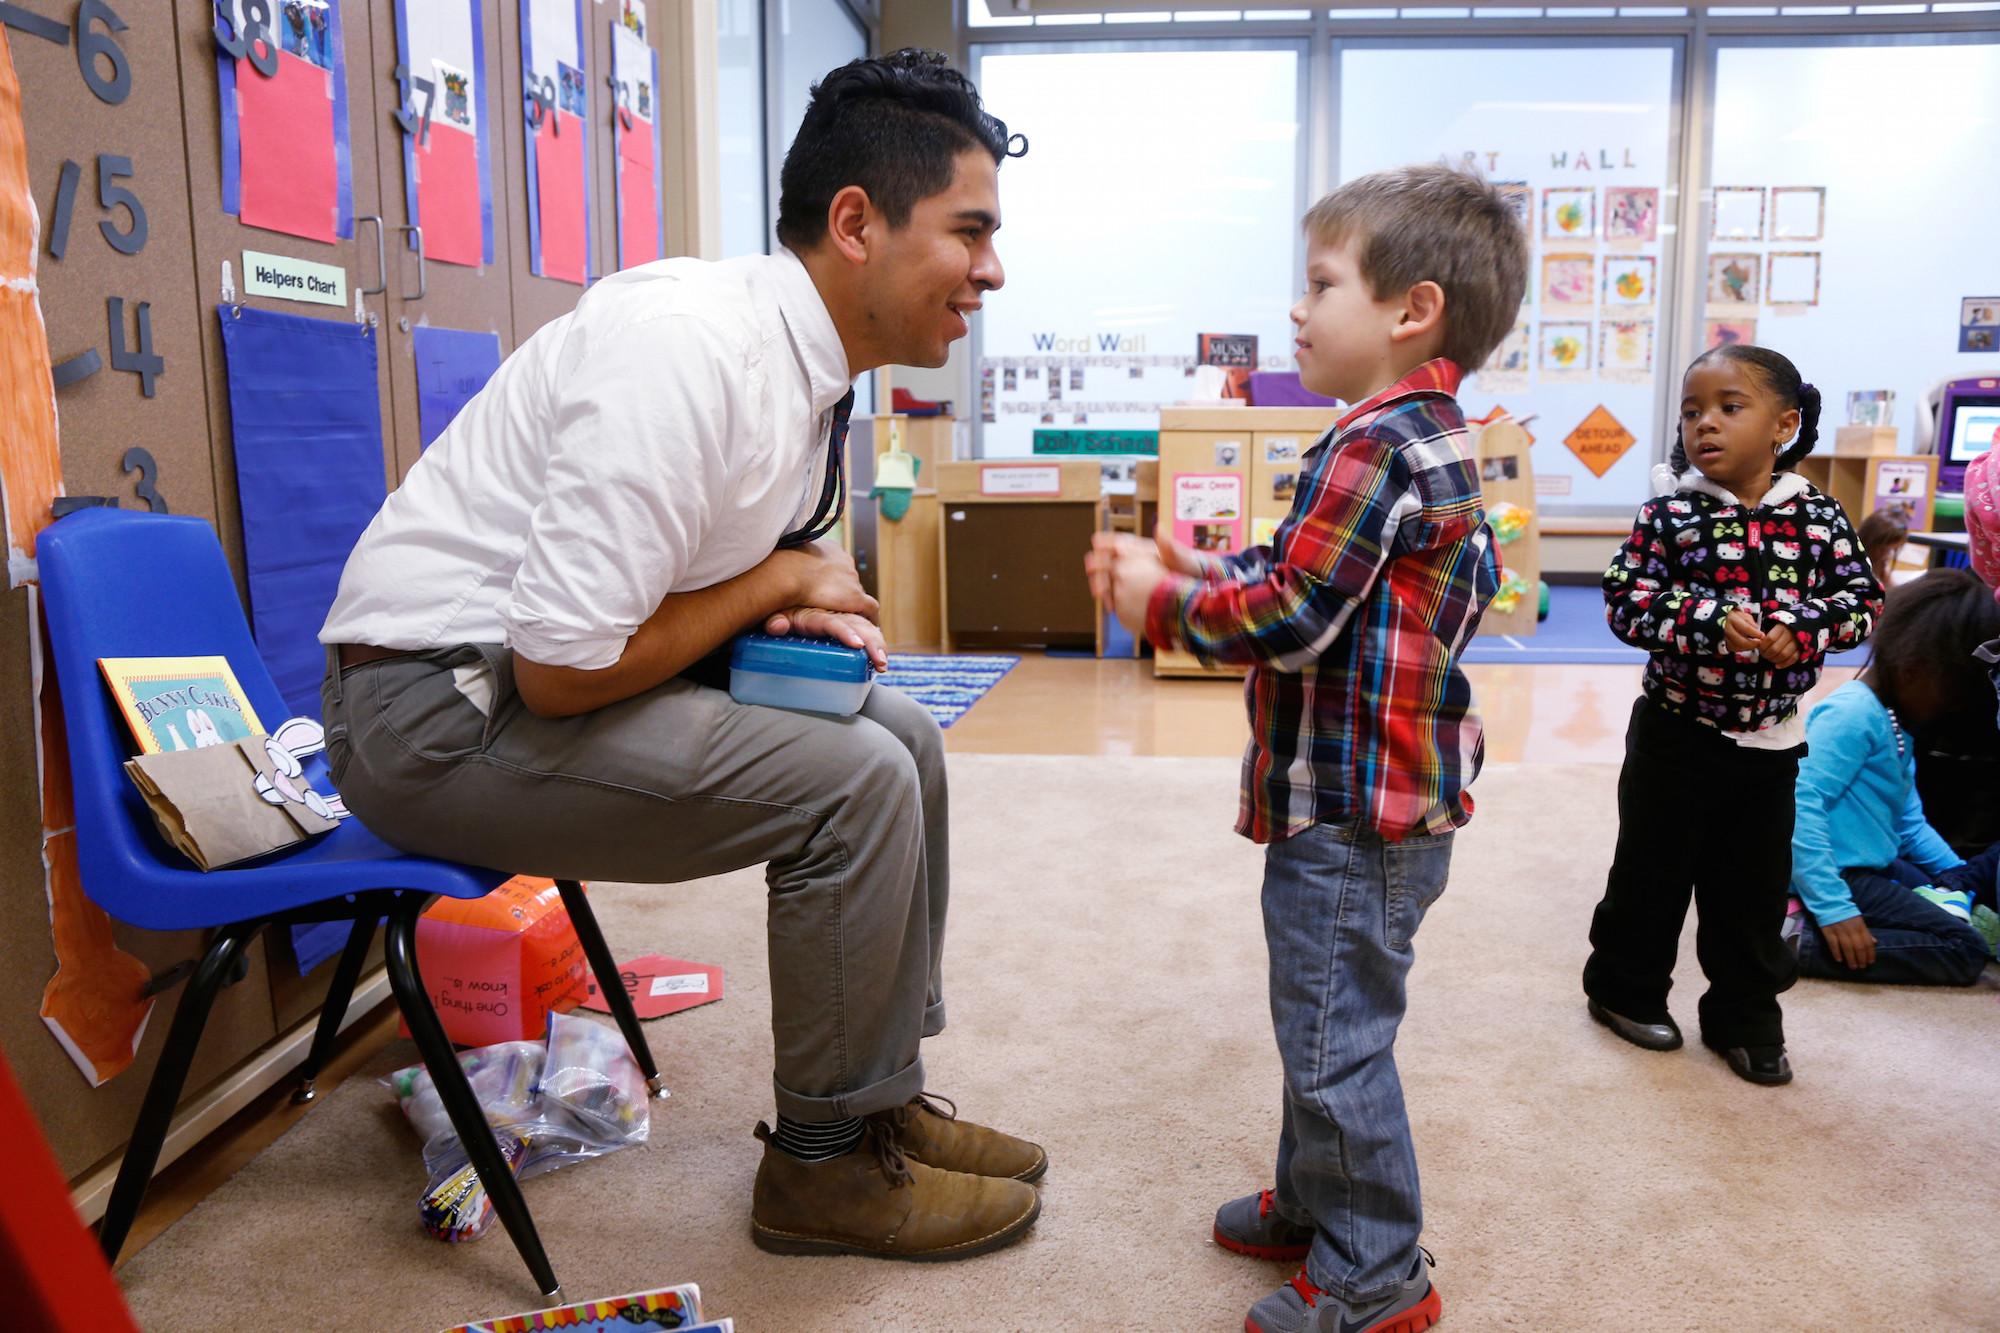 A TFA teacher talks with his young student